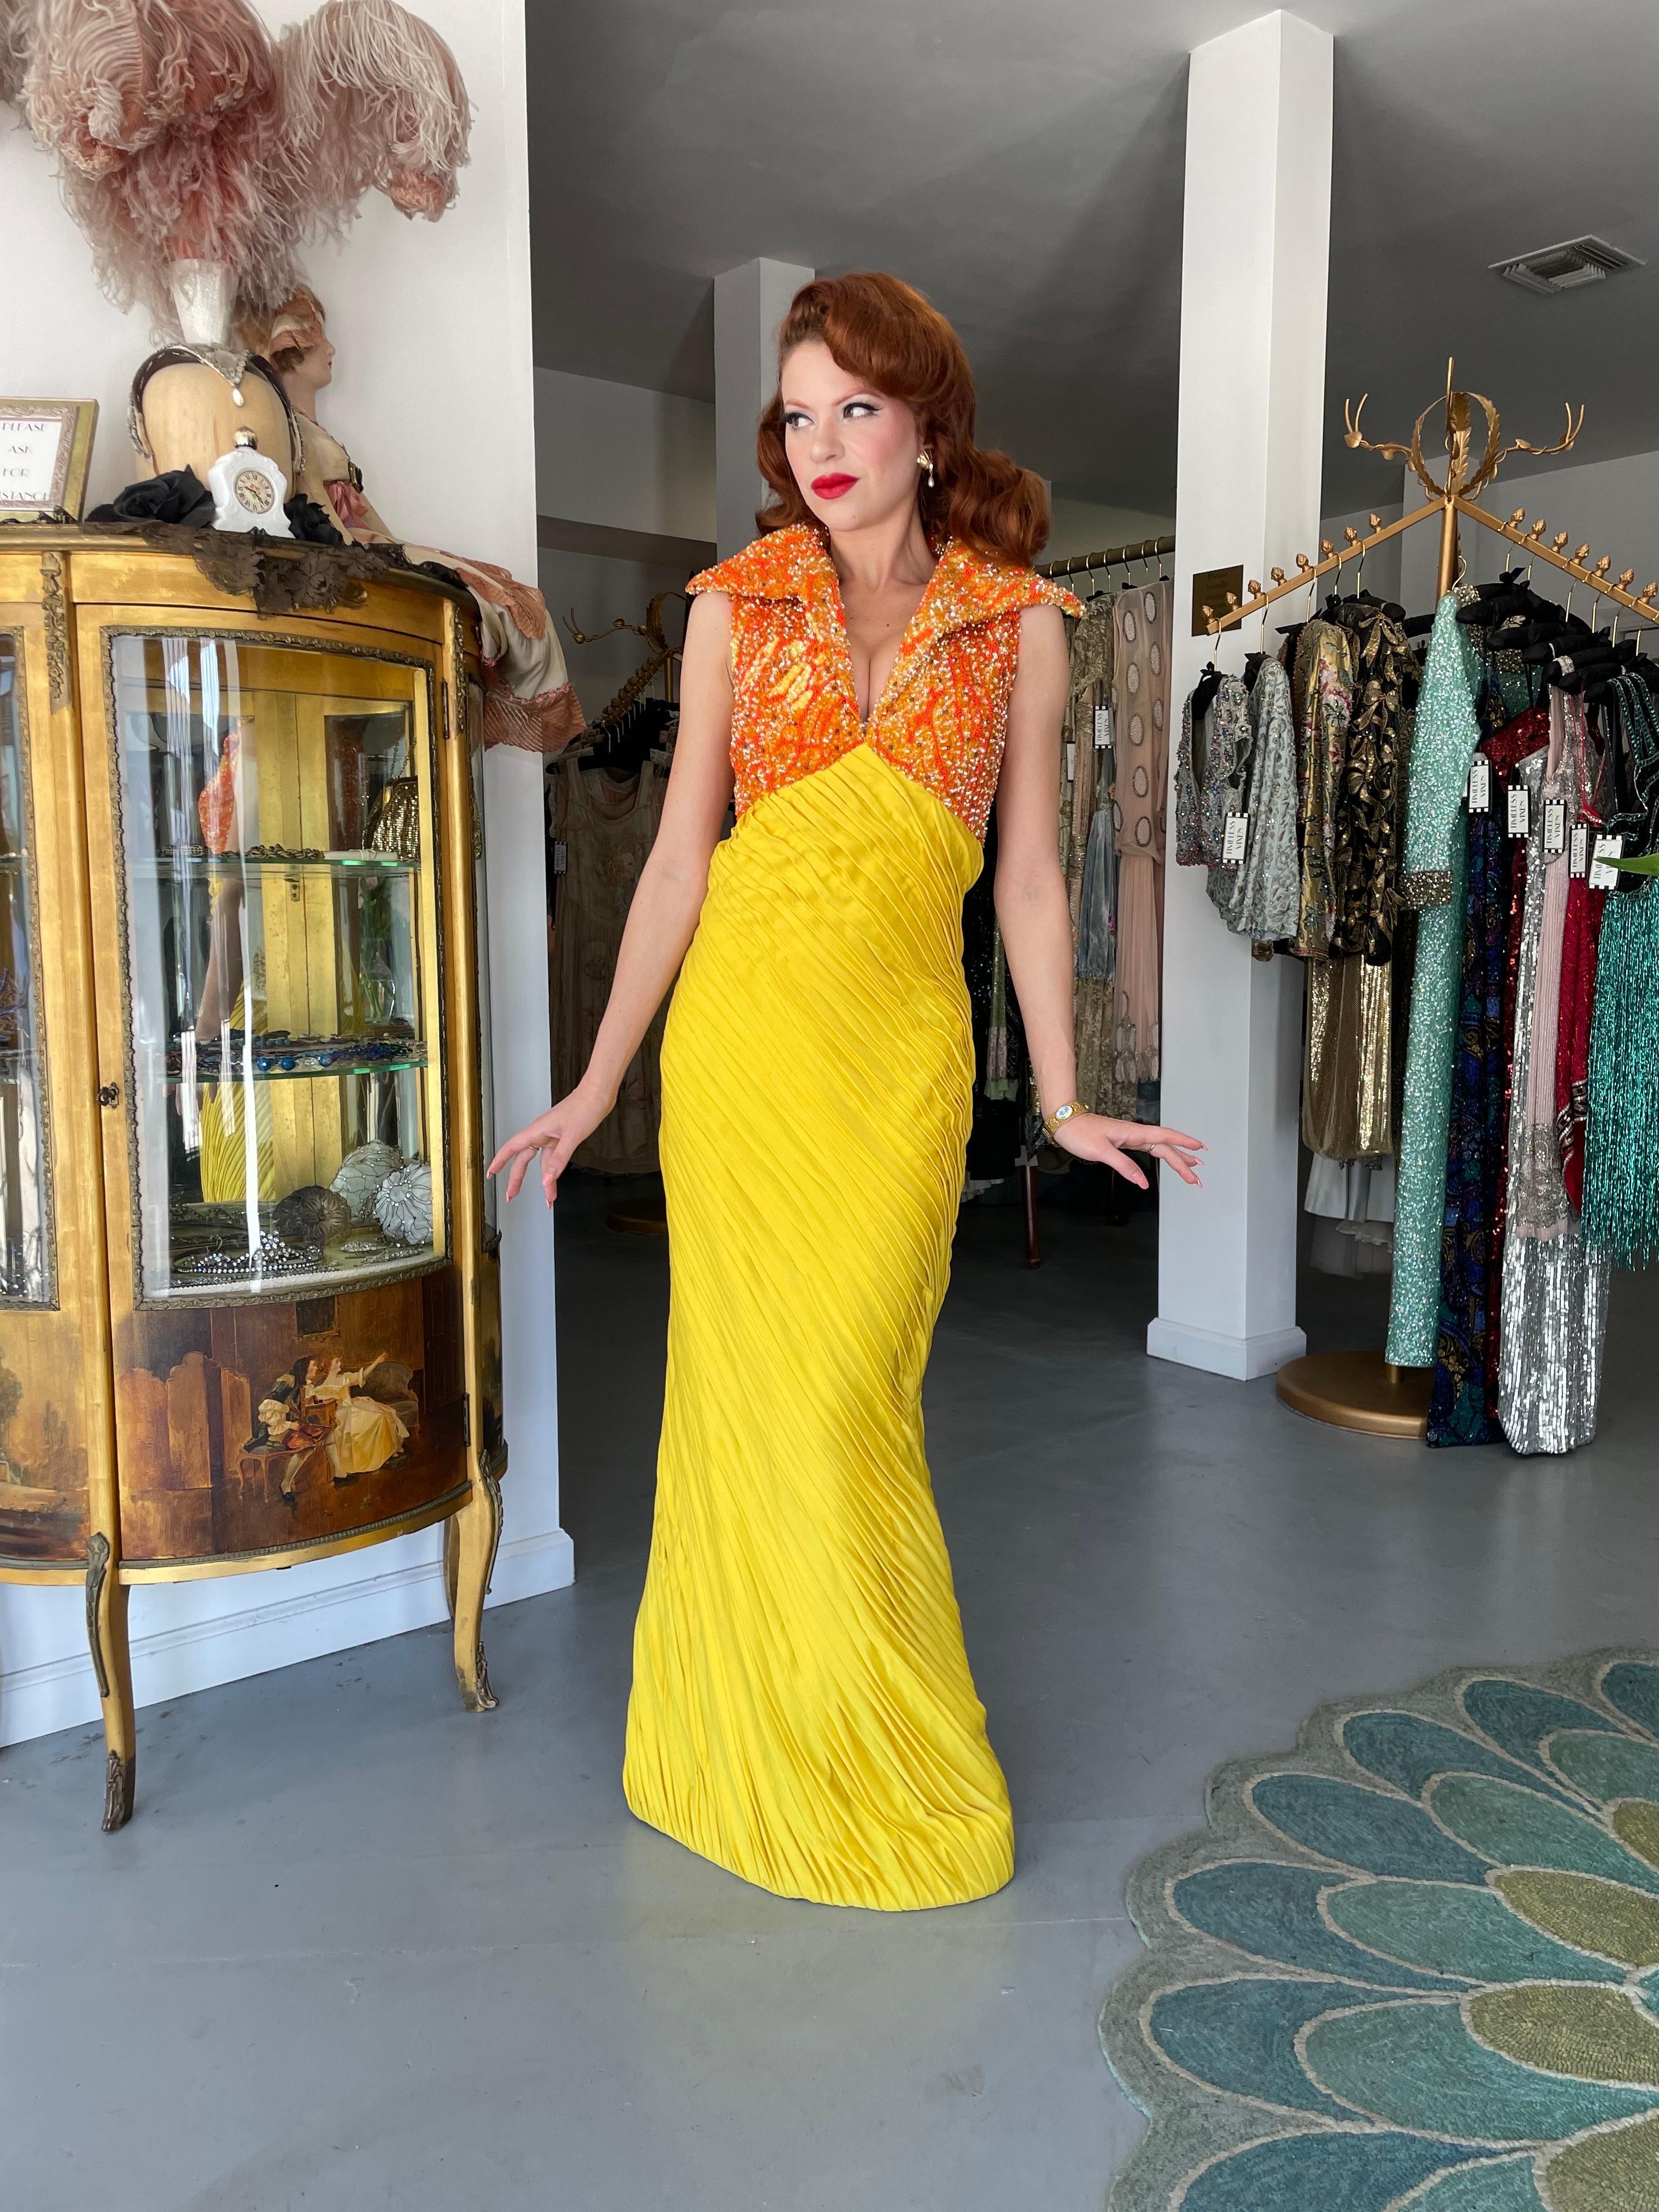 An absolutely breathtaking and ultra rare La Mendola Italian couture vibrant yellow pleated silk jersey beaded glamour gown dating back to their 1968 spring/summer collection. Though their work has only recently begun to be appreciated, Mike La